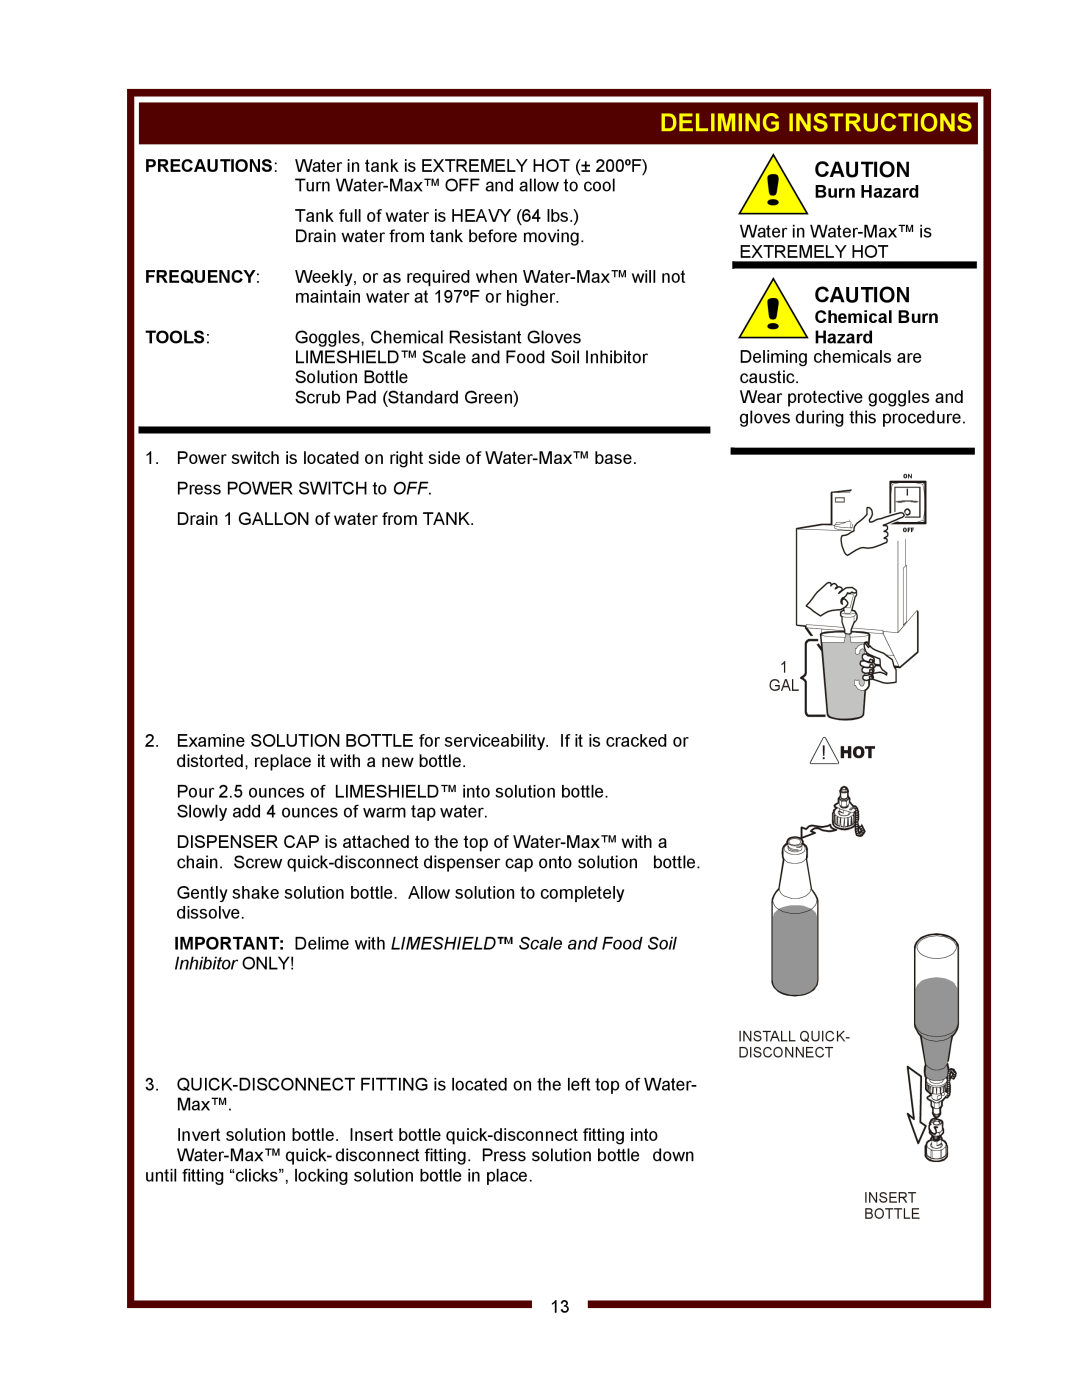 Wells WM-TR Deliming Instructions, IMPORTANT Delime with LIMESHIELD Scale and Food Soil Inhibitor ONLY, Burn Hazard 